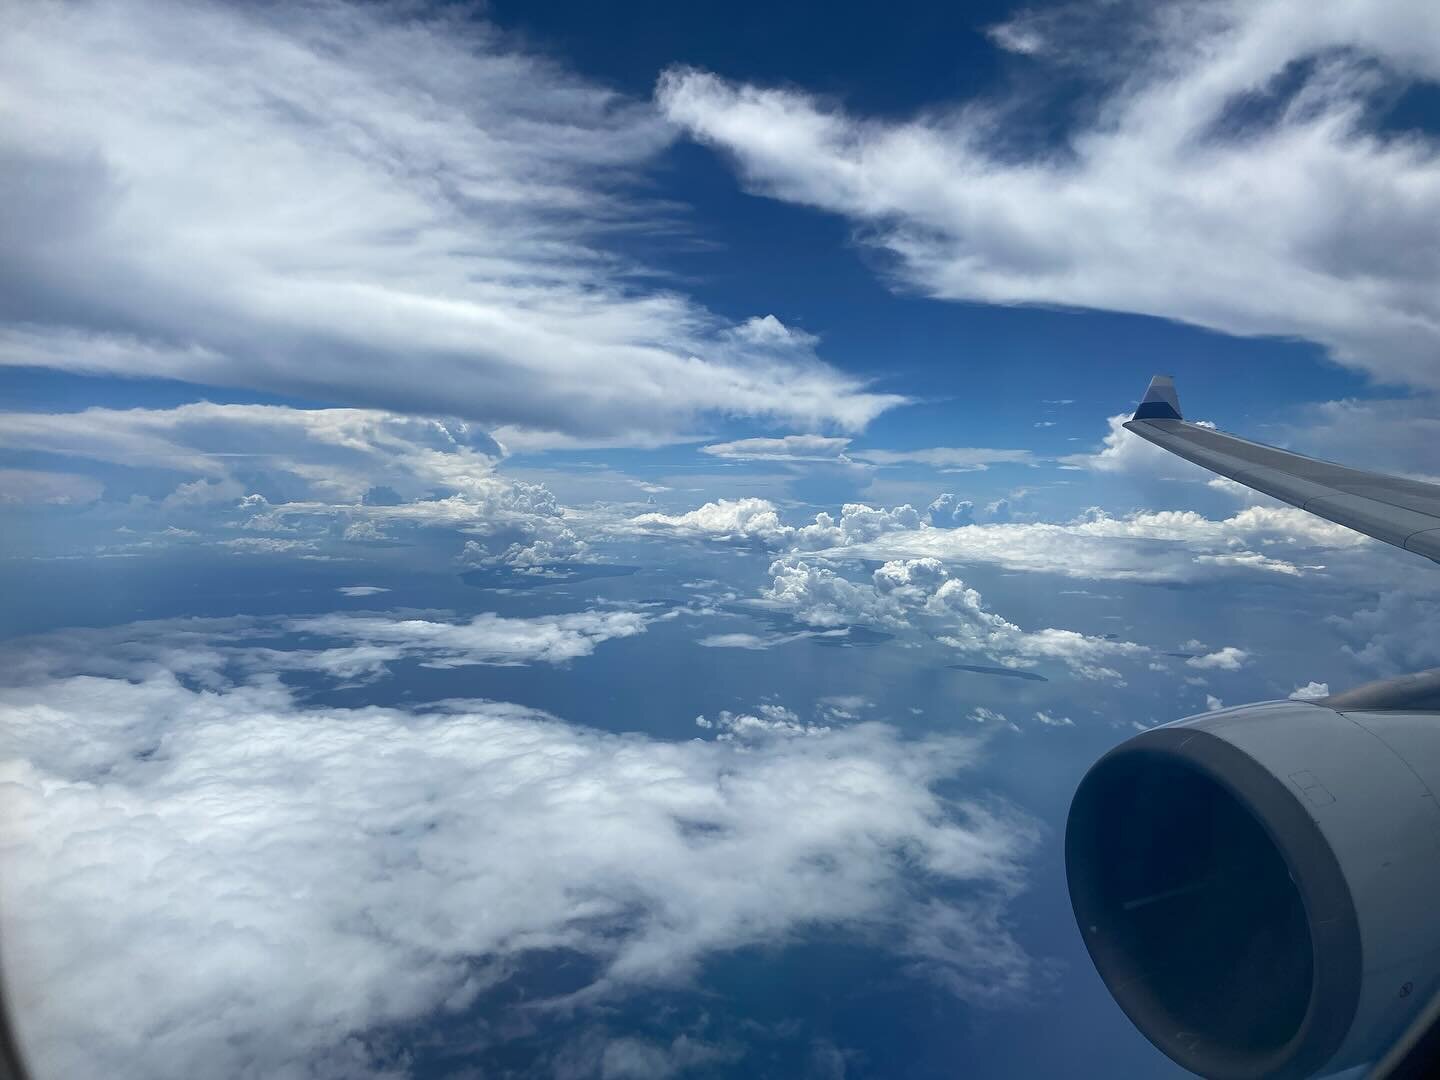 Arrived in Bali!! One of my favorite parts of flying into Bali has always been the cloud formations! I think lighting and the bold greens and blues just accent that super white puffiness. As the clouds form over the land and constantly are morphing a